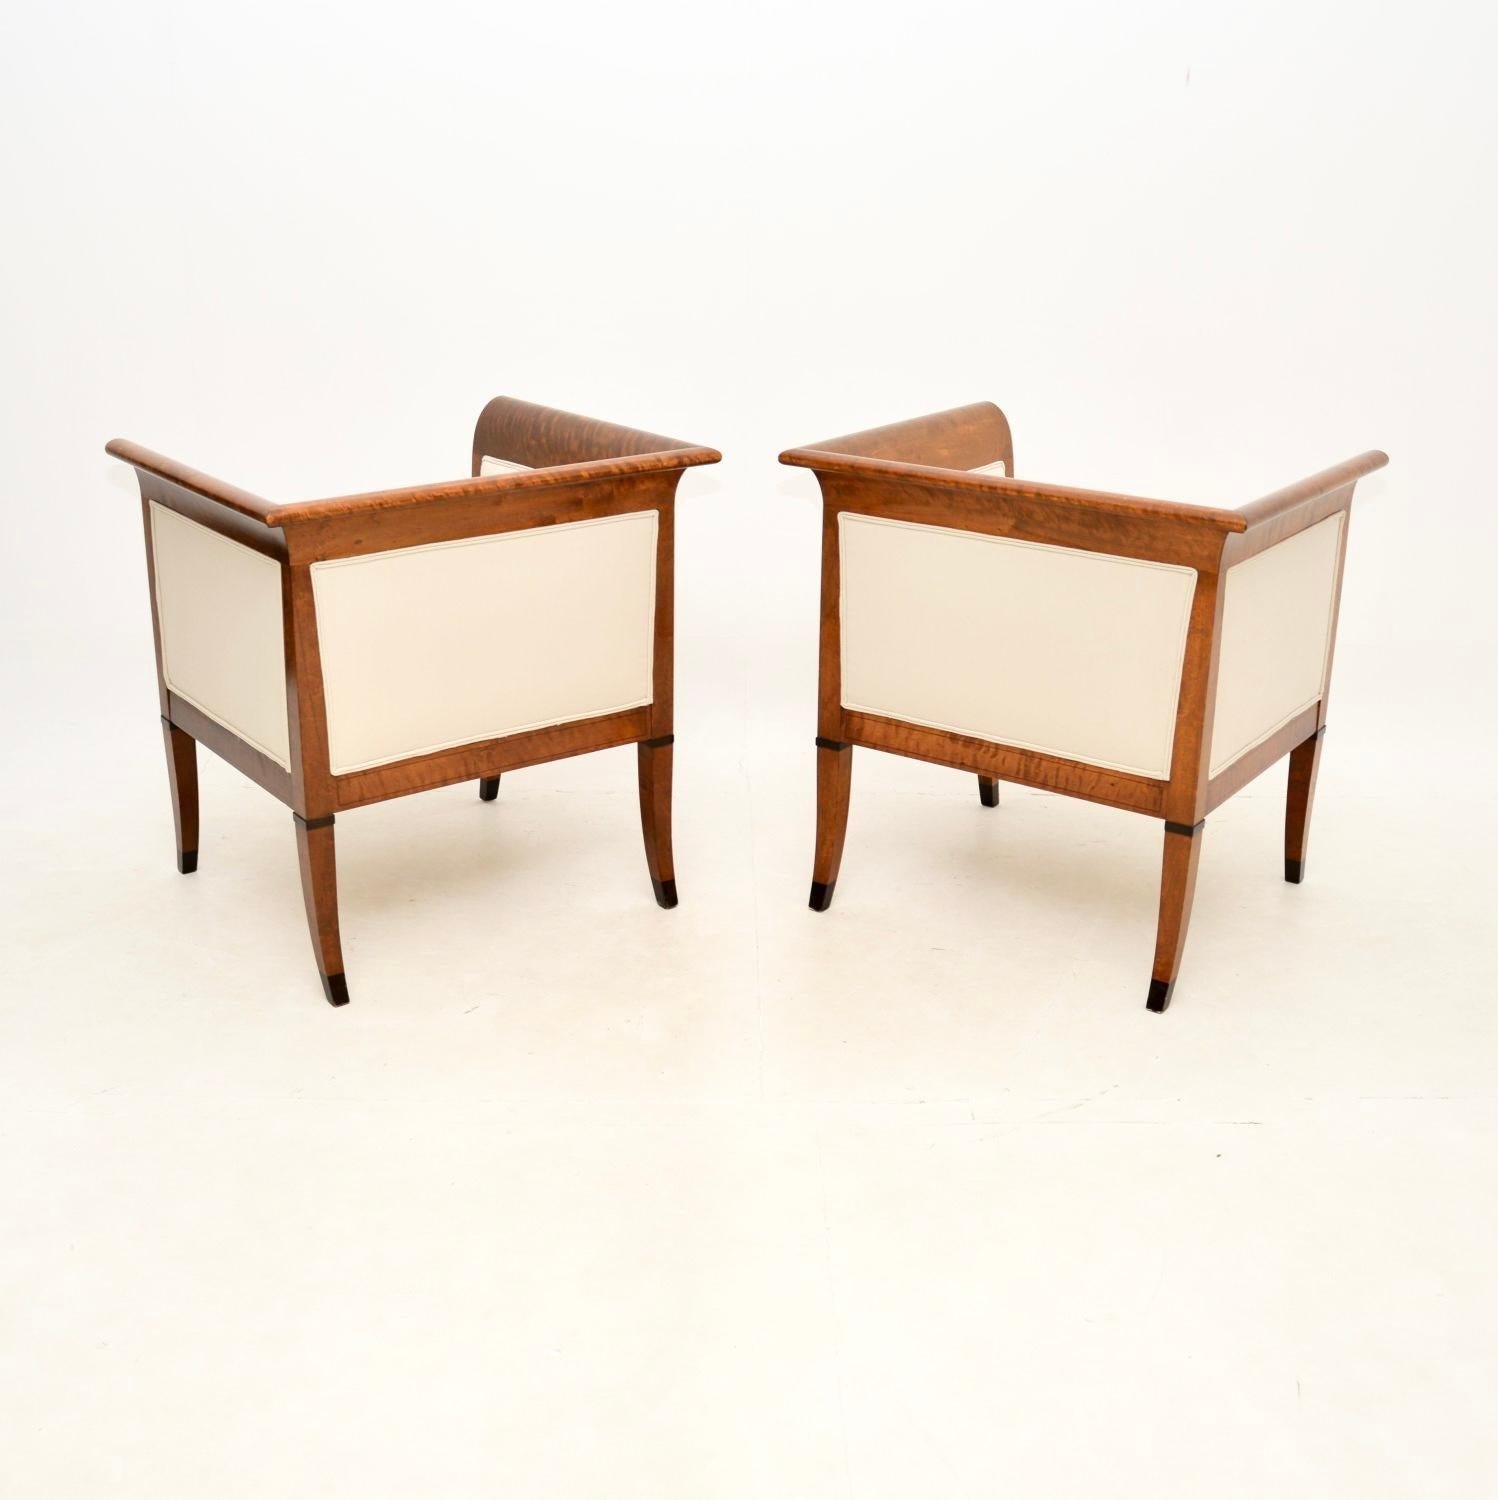 Pair of Antique Swedish Satin Birch Biedermeier Armchairs In Good Condition For Sale In London, GB